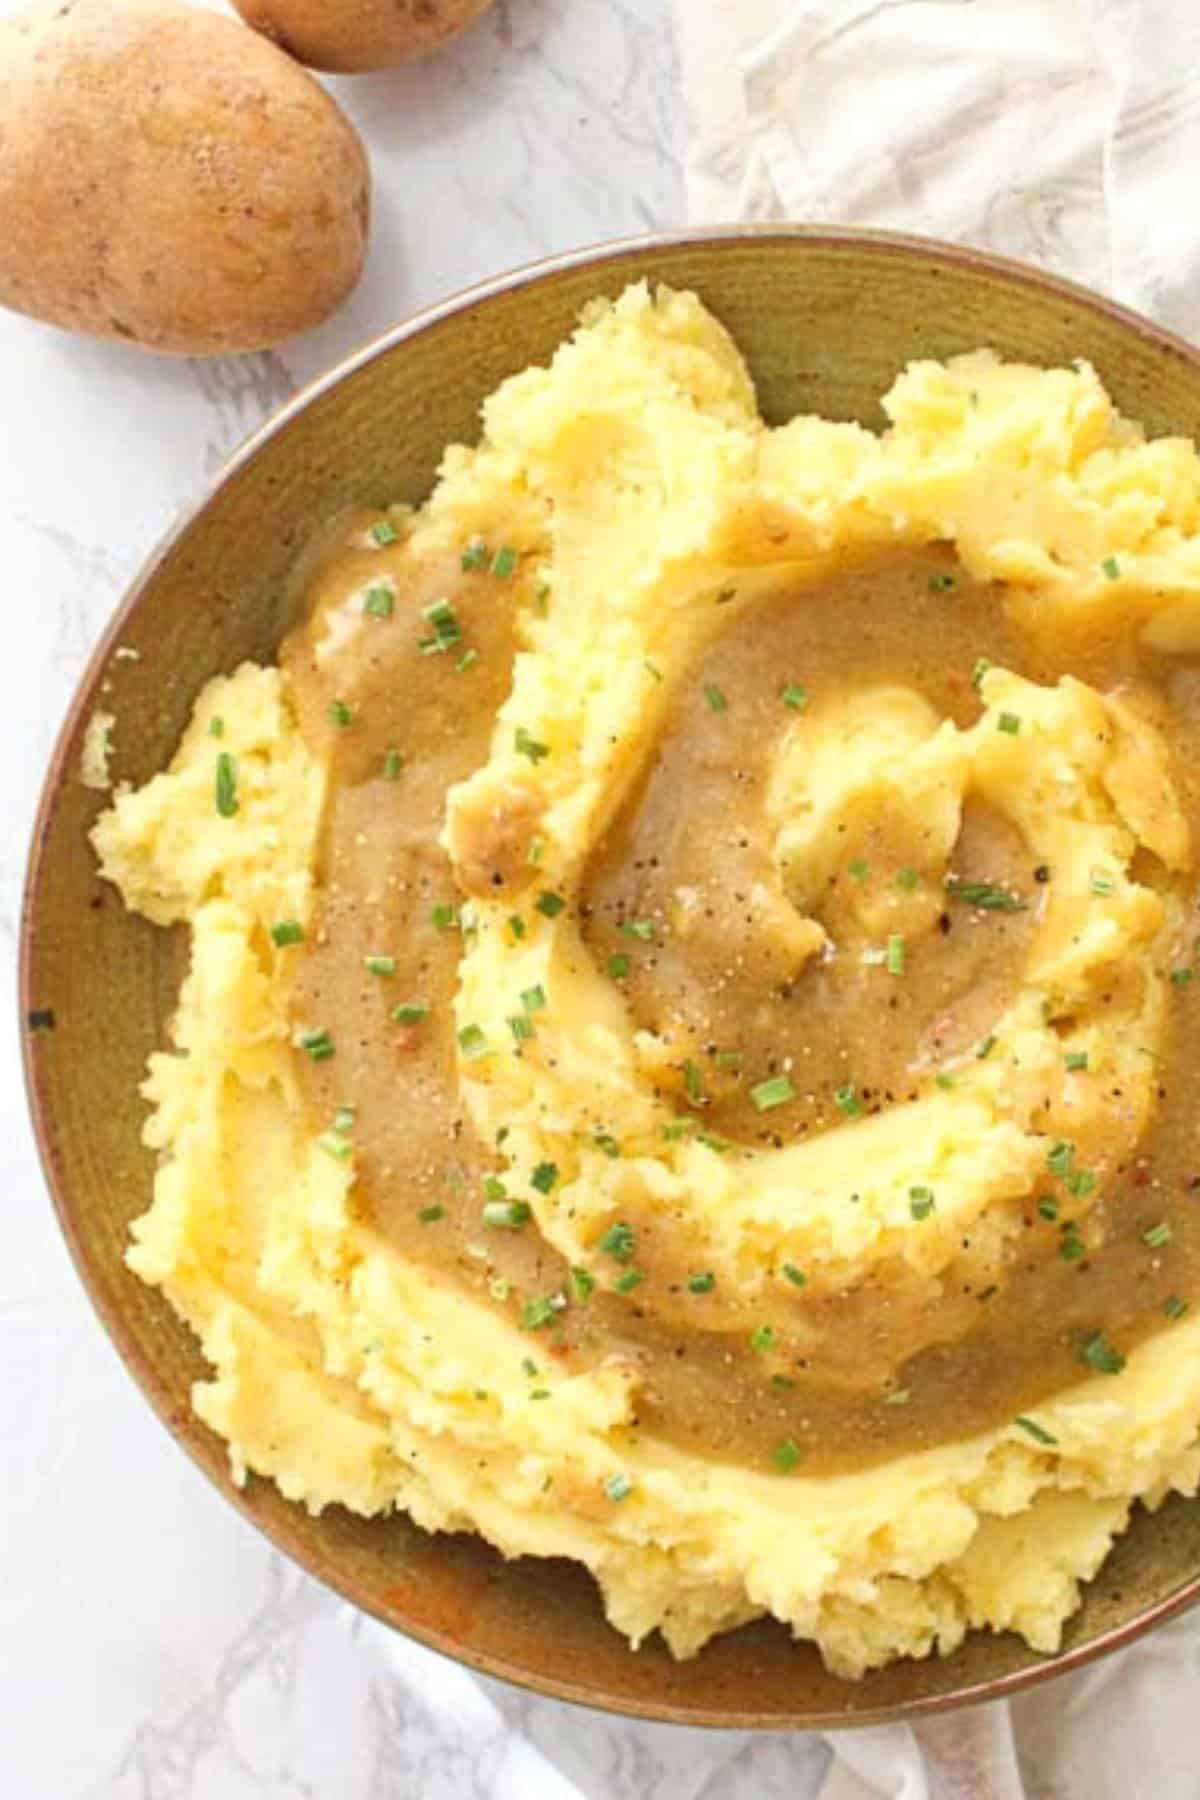 Overhead view of vegan brown gravy on mashed potatoes.